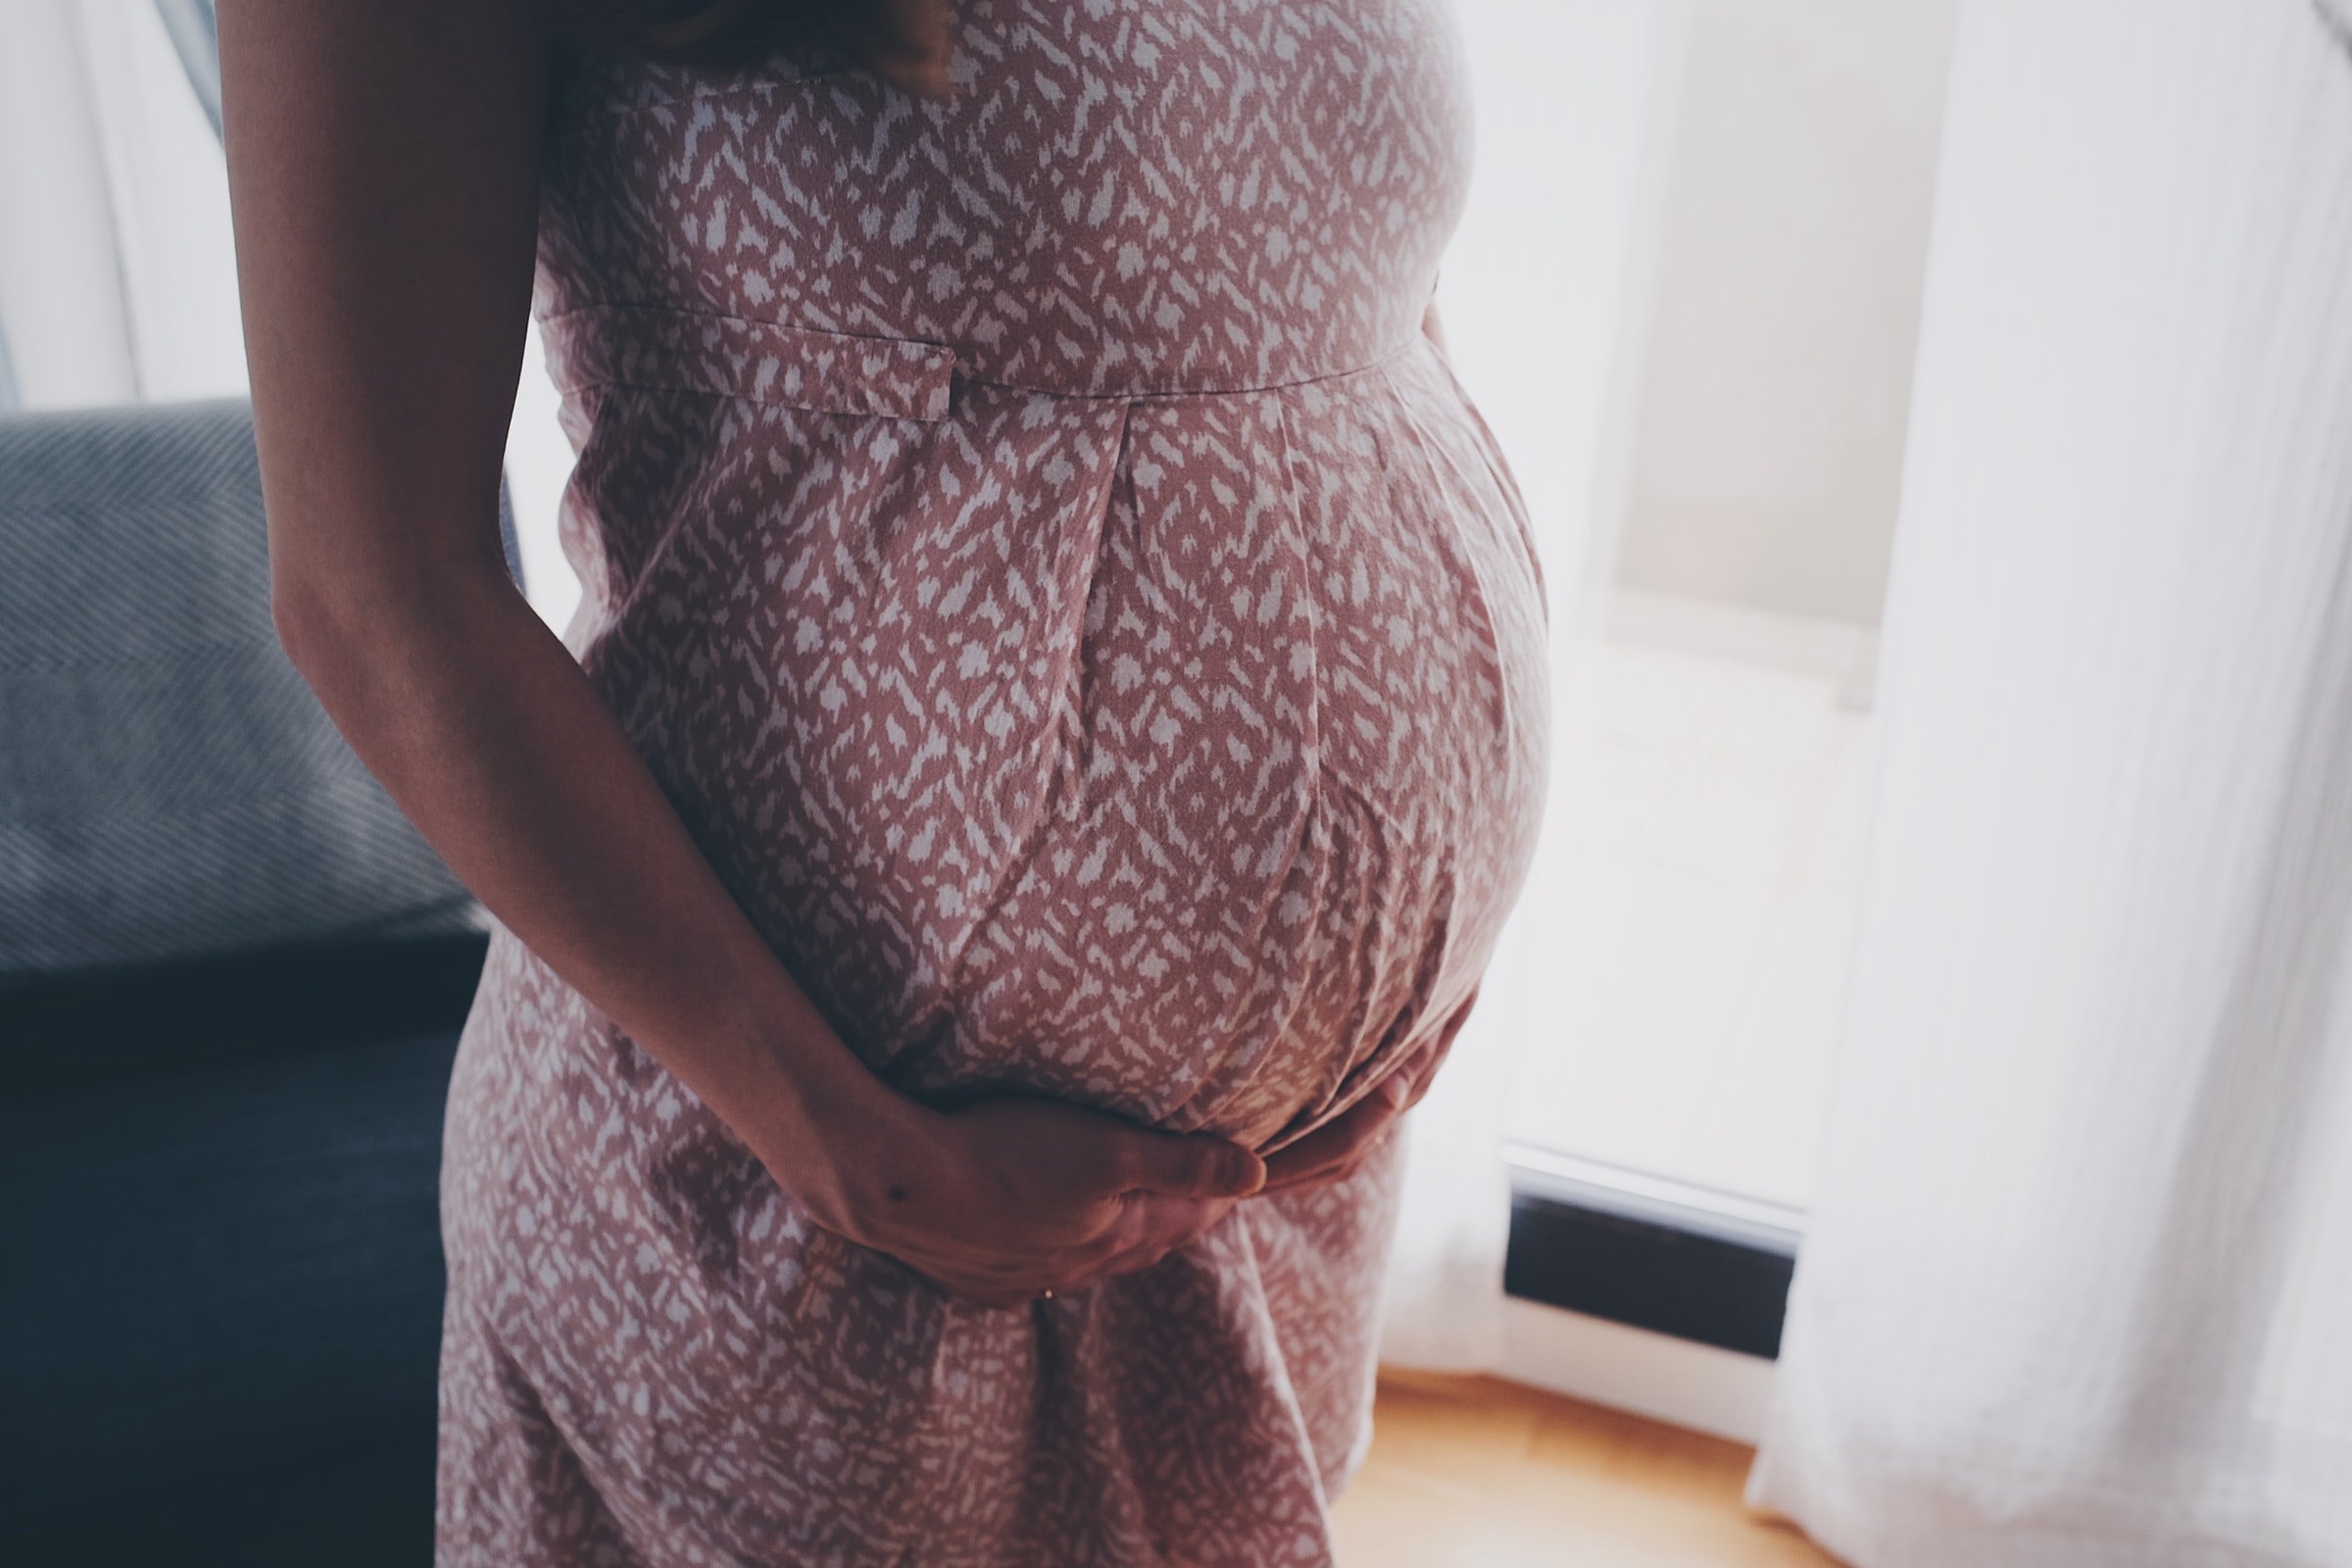 A pregnant woman holding her belly. | Source: Unsplash